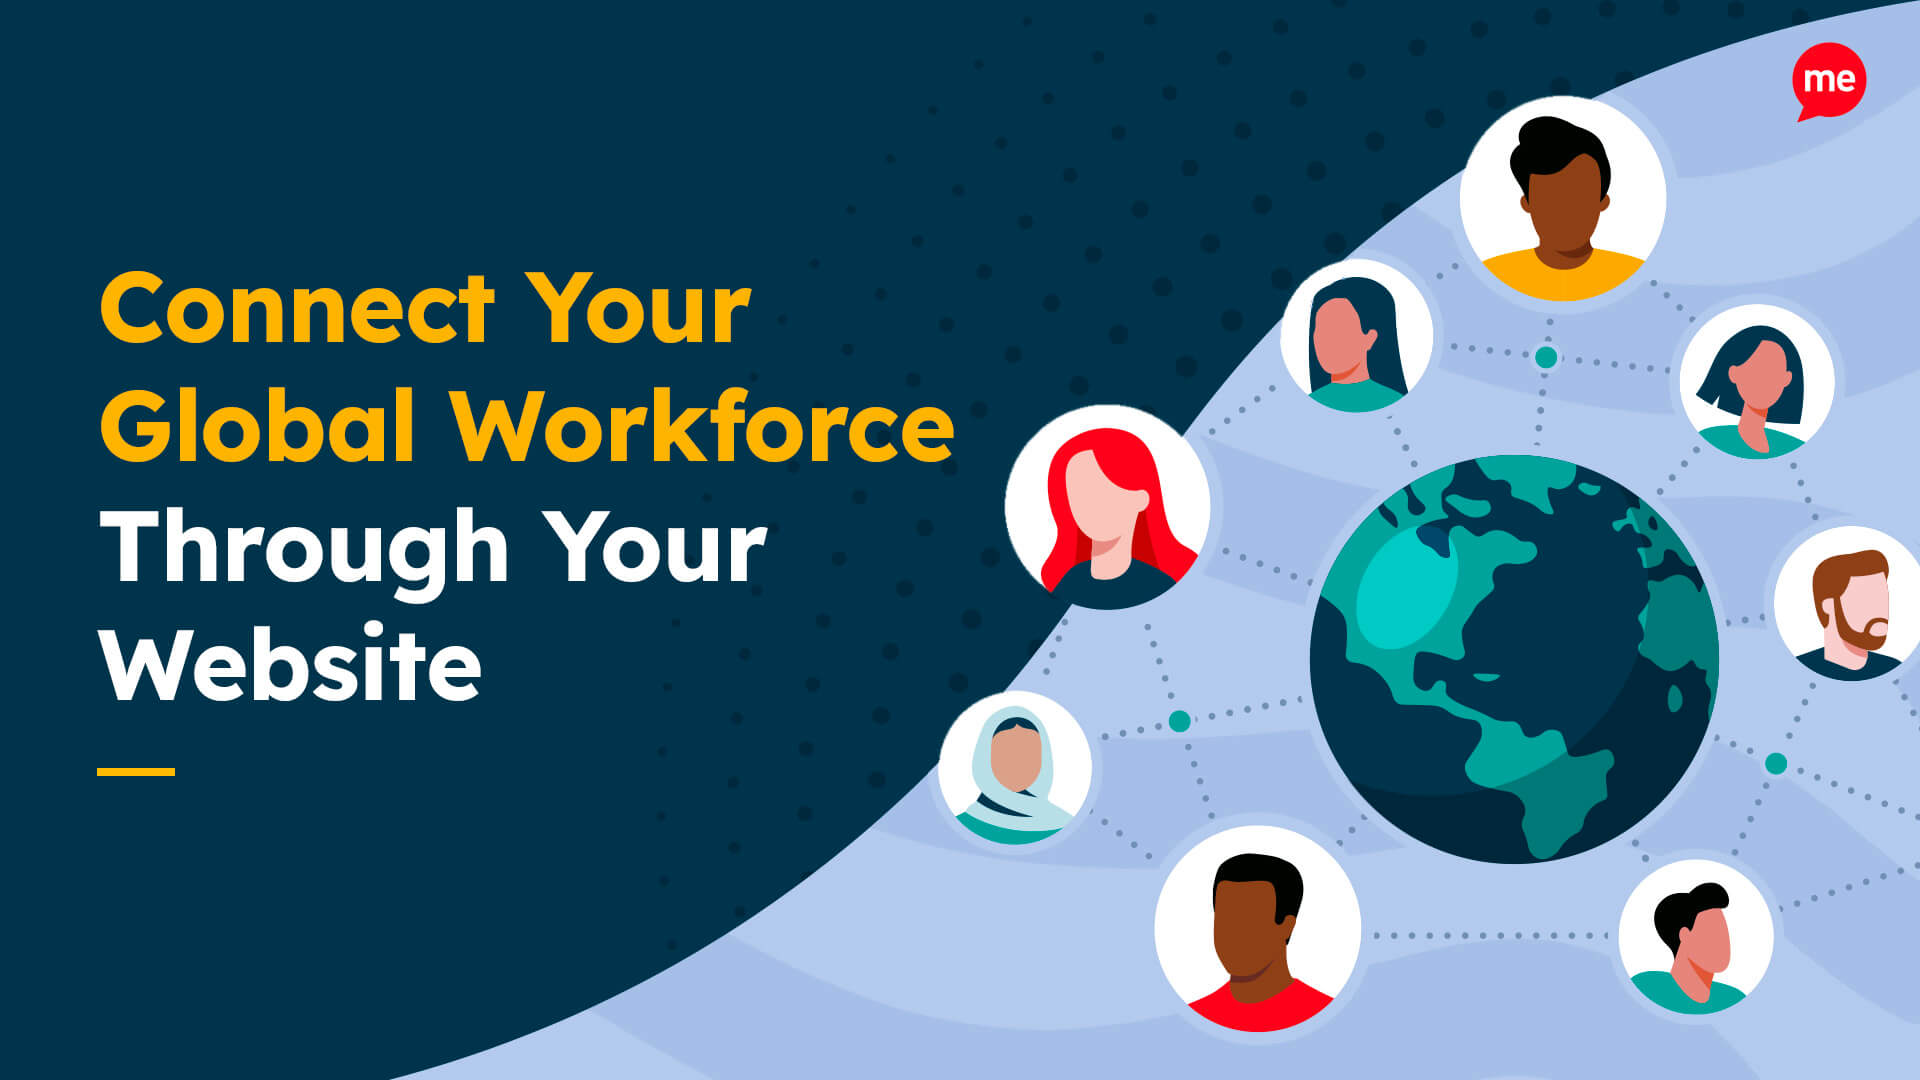 Connect Your Global Workforce Through Your Website